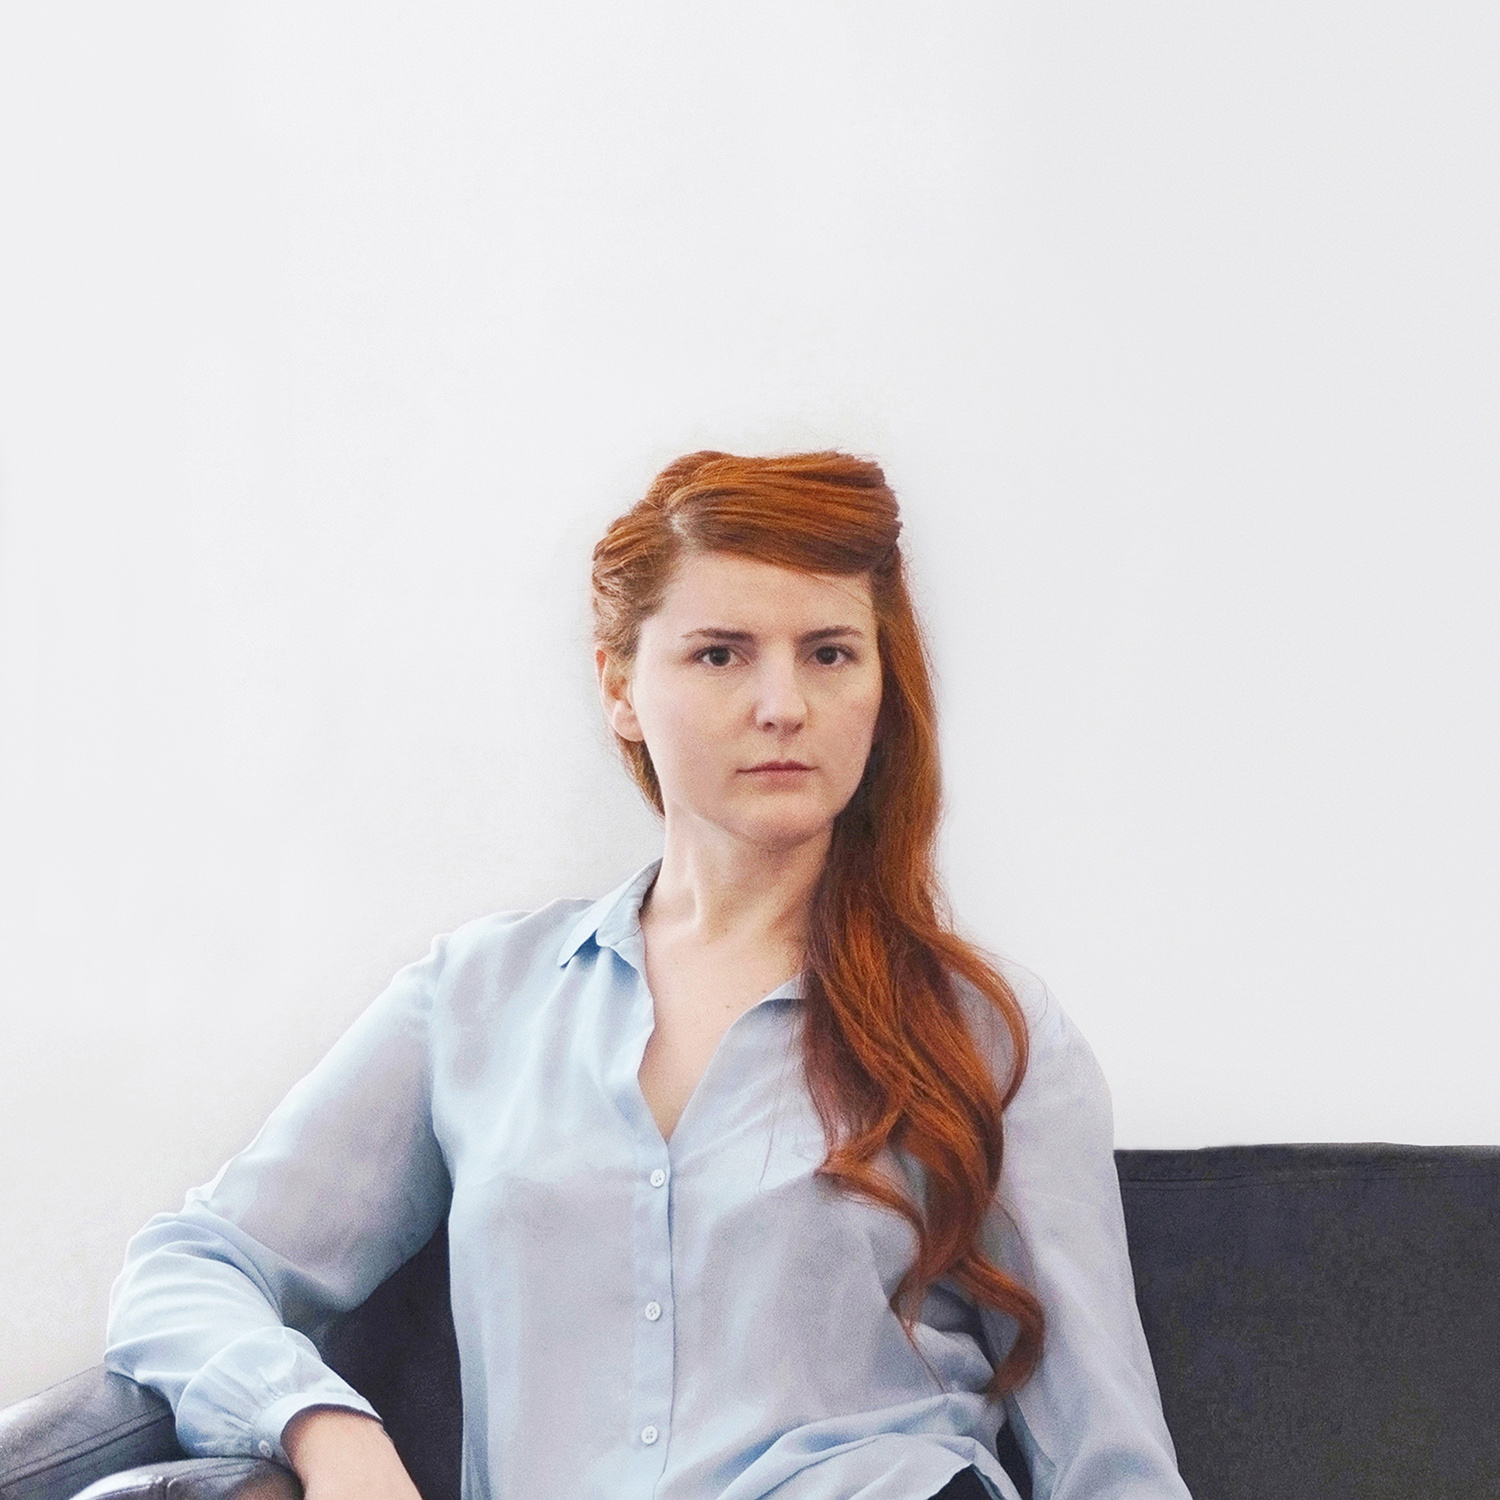 Color photograph of a light skinned woman with long red hair wearing a button-up shirt and looking at the camera